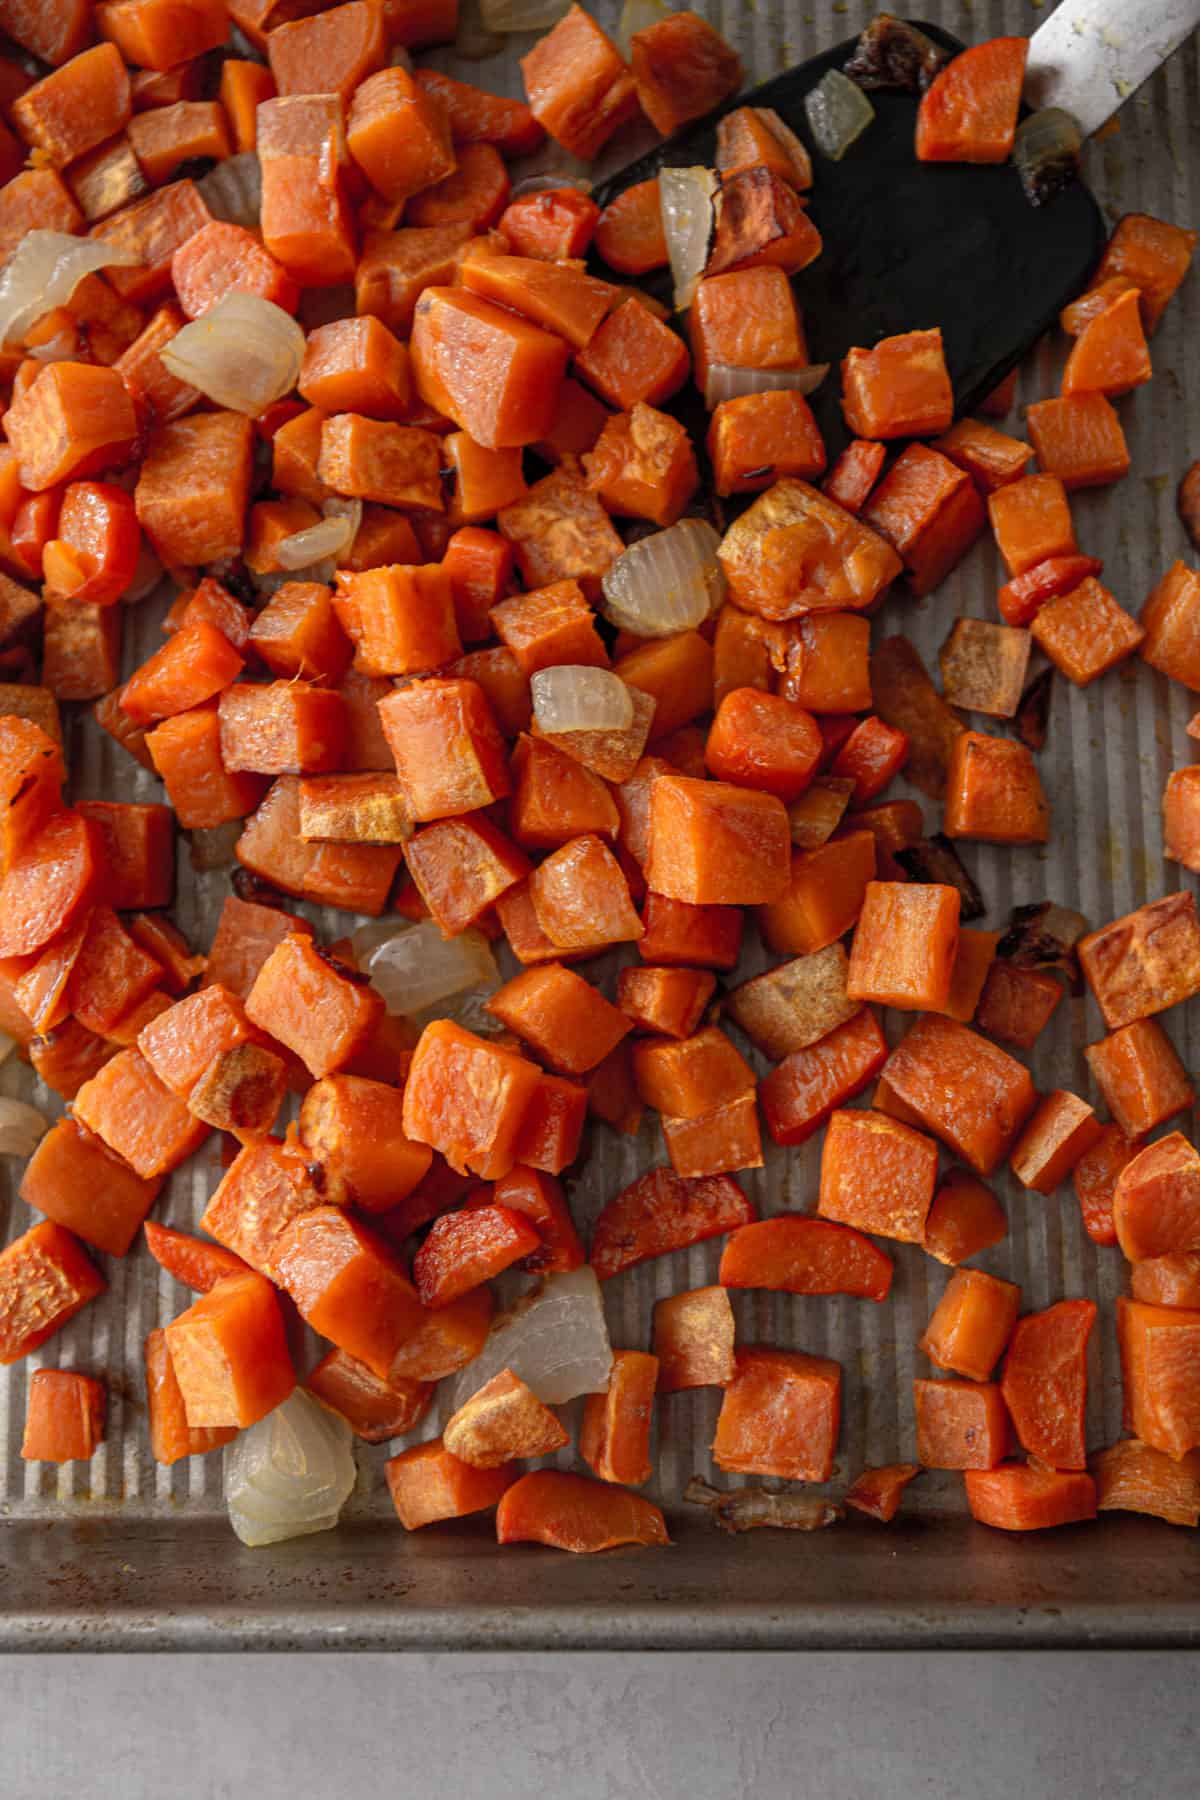 roasted sweet potatoes, carrots, and onions on a sheet pan